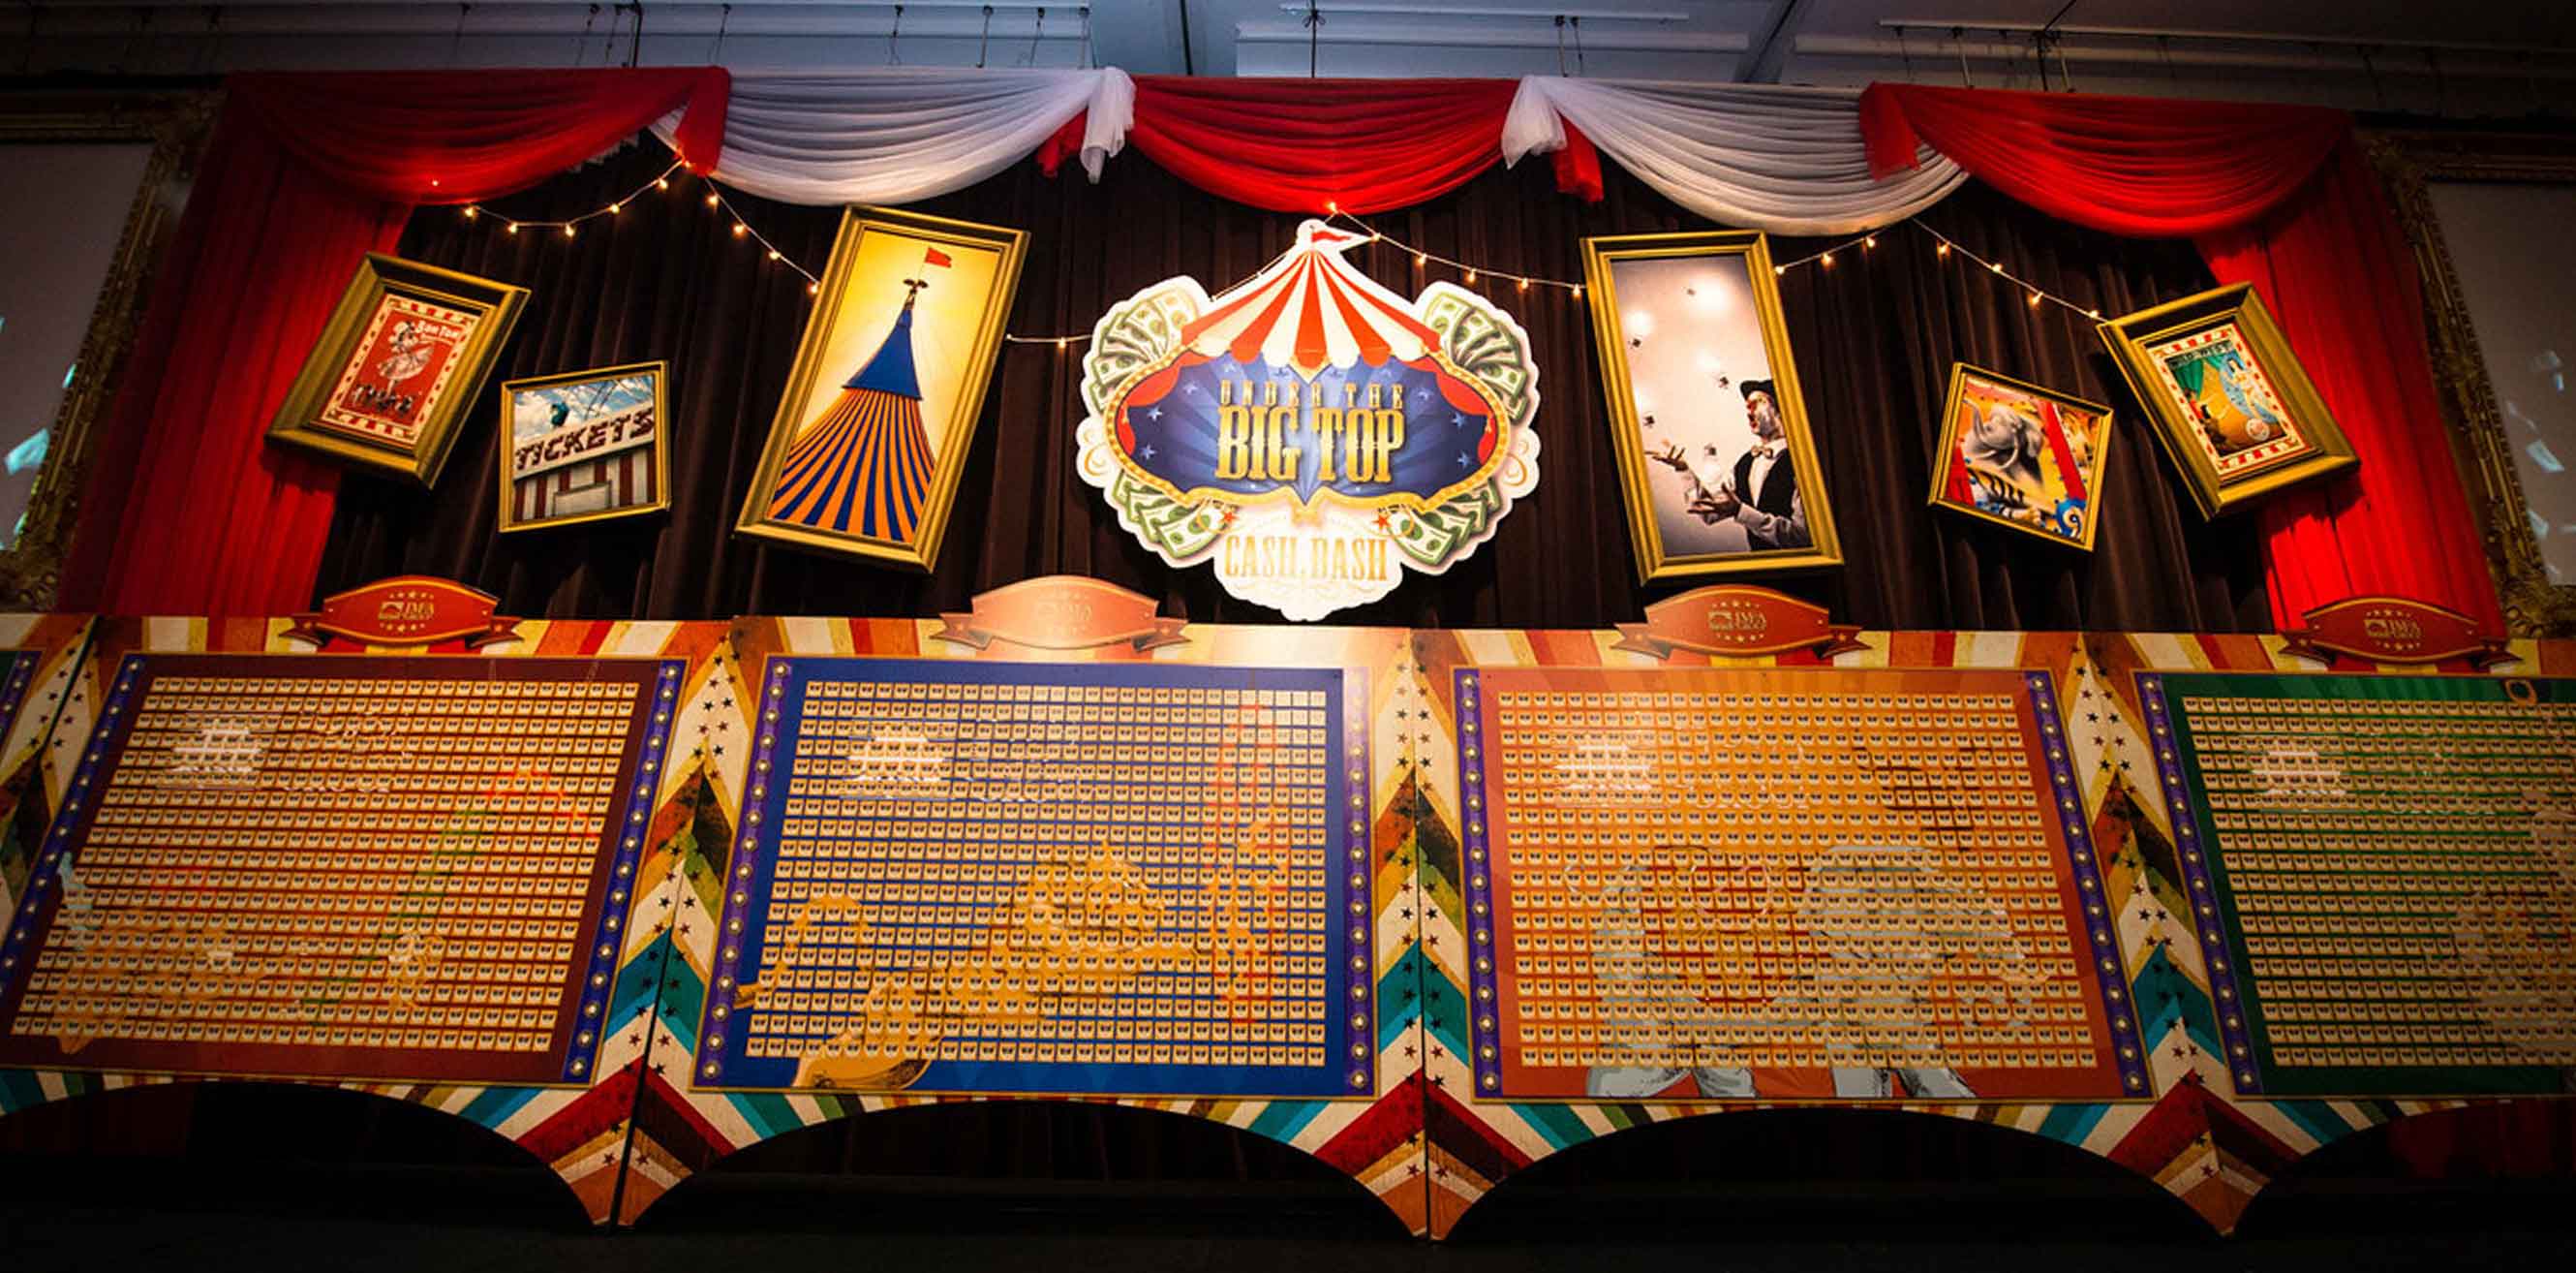 Circus themed signage